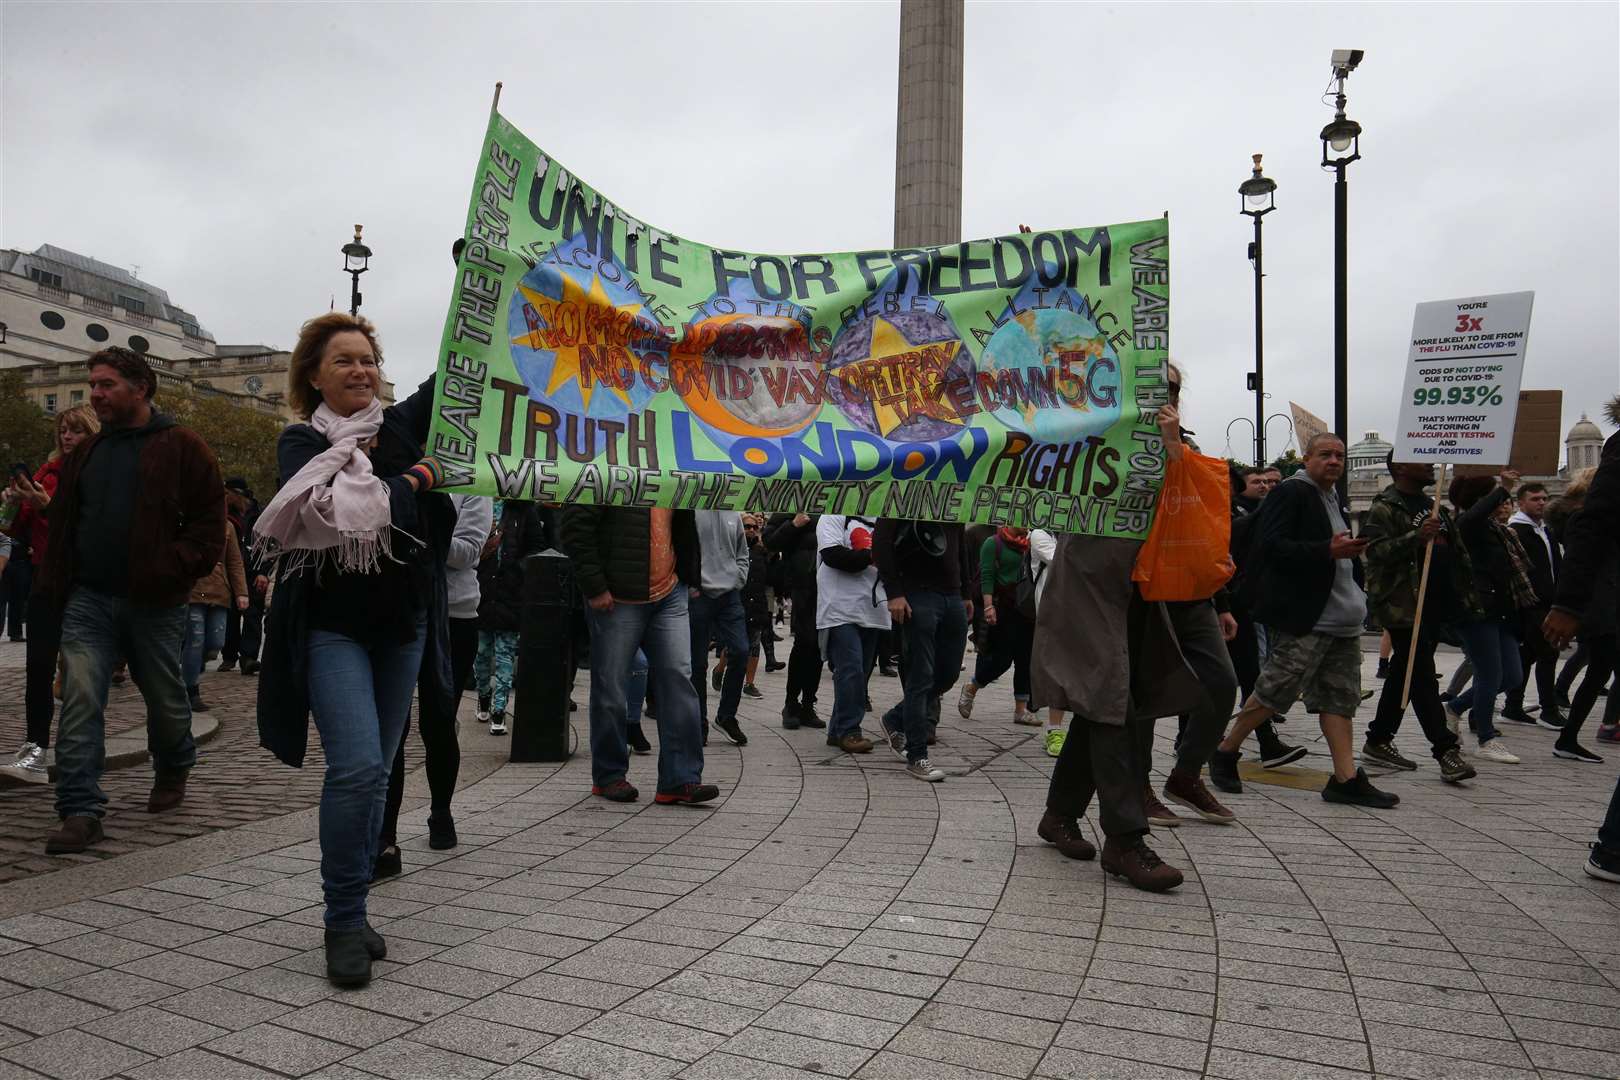 Protesters gathered in Trafalgar Square, London in a demonstration against lockdown restrictions (Jonathan Brady/PA)